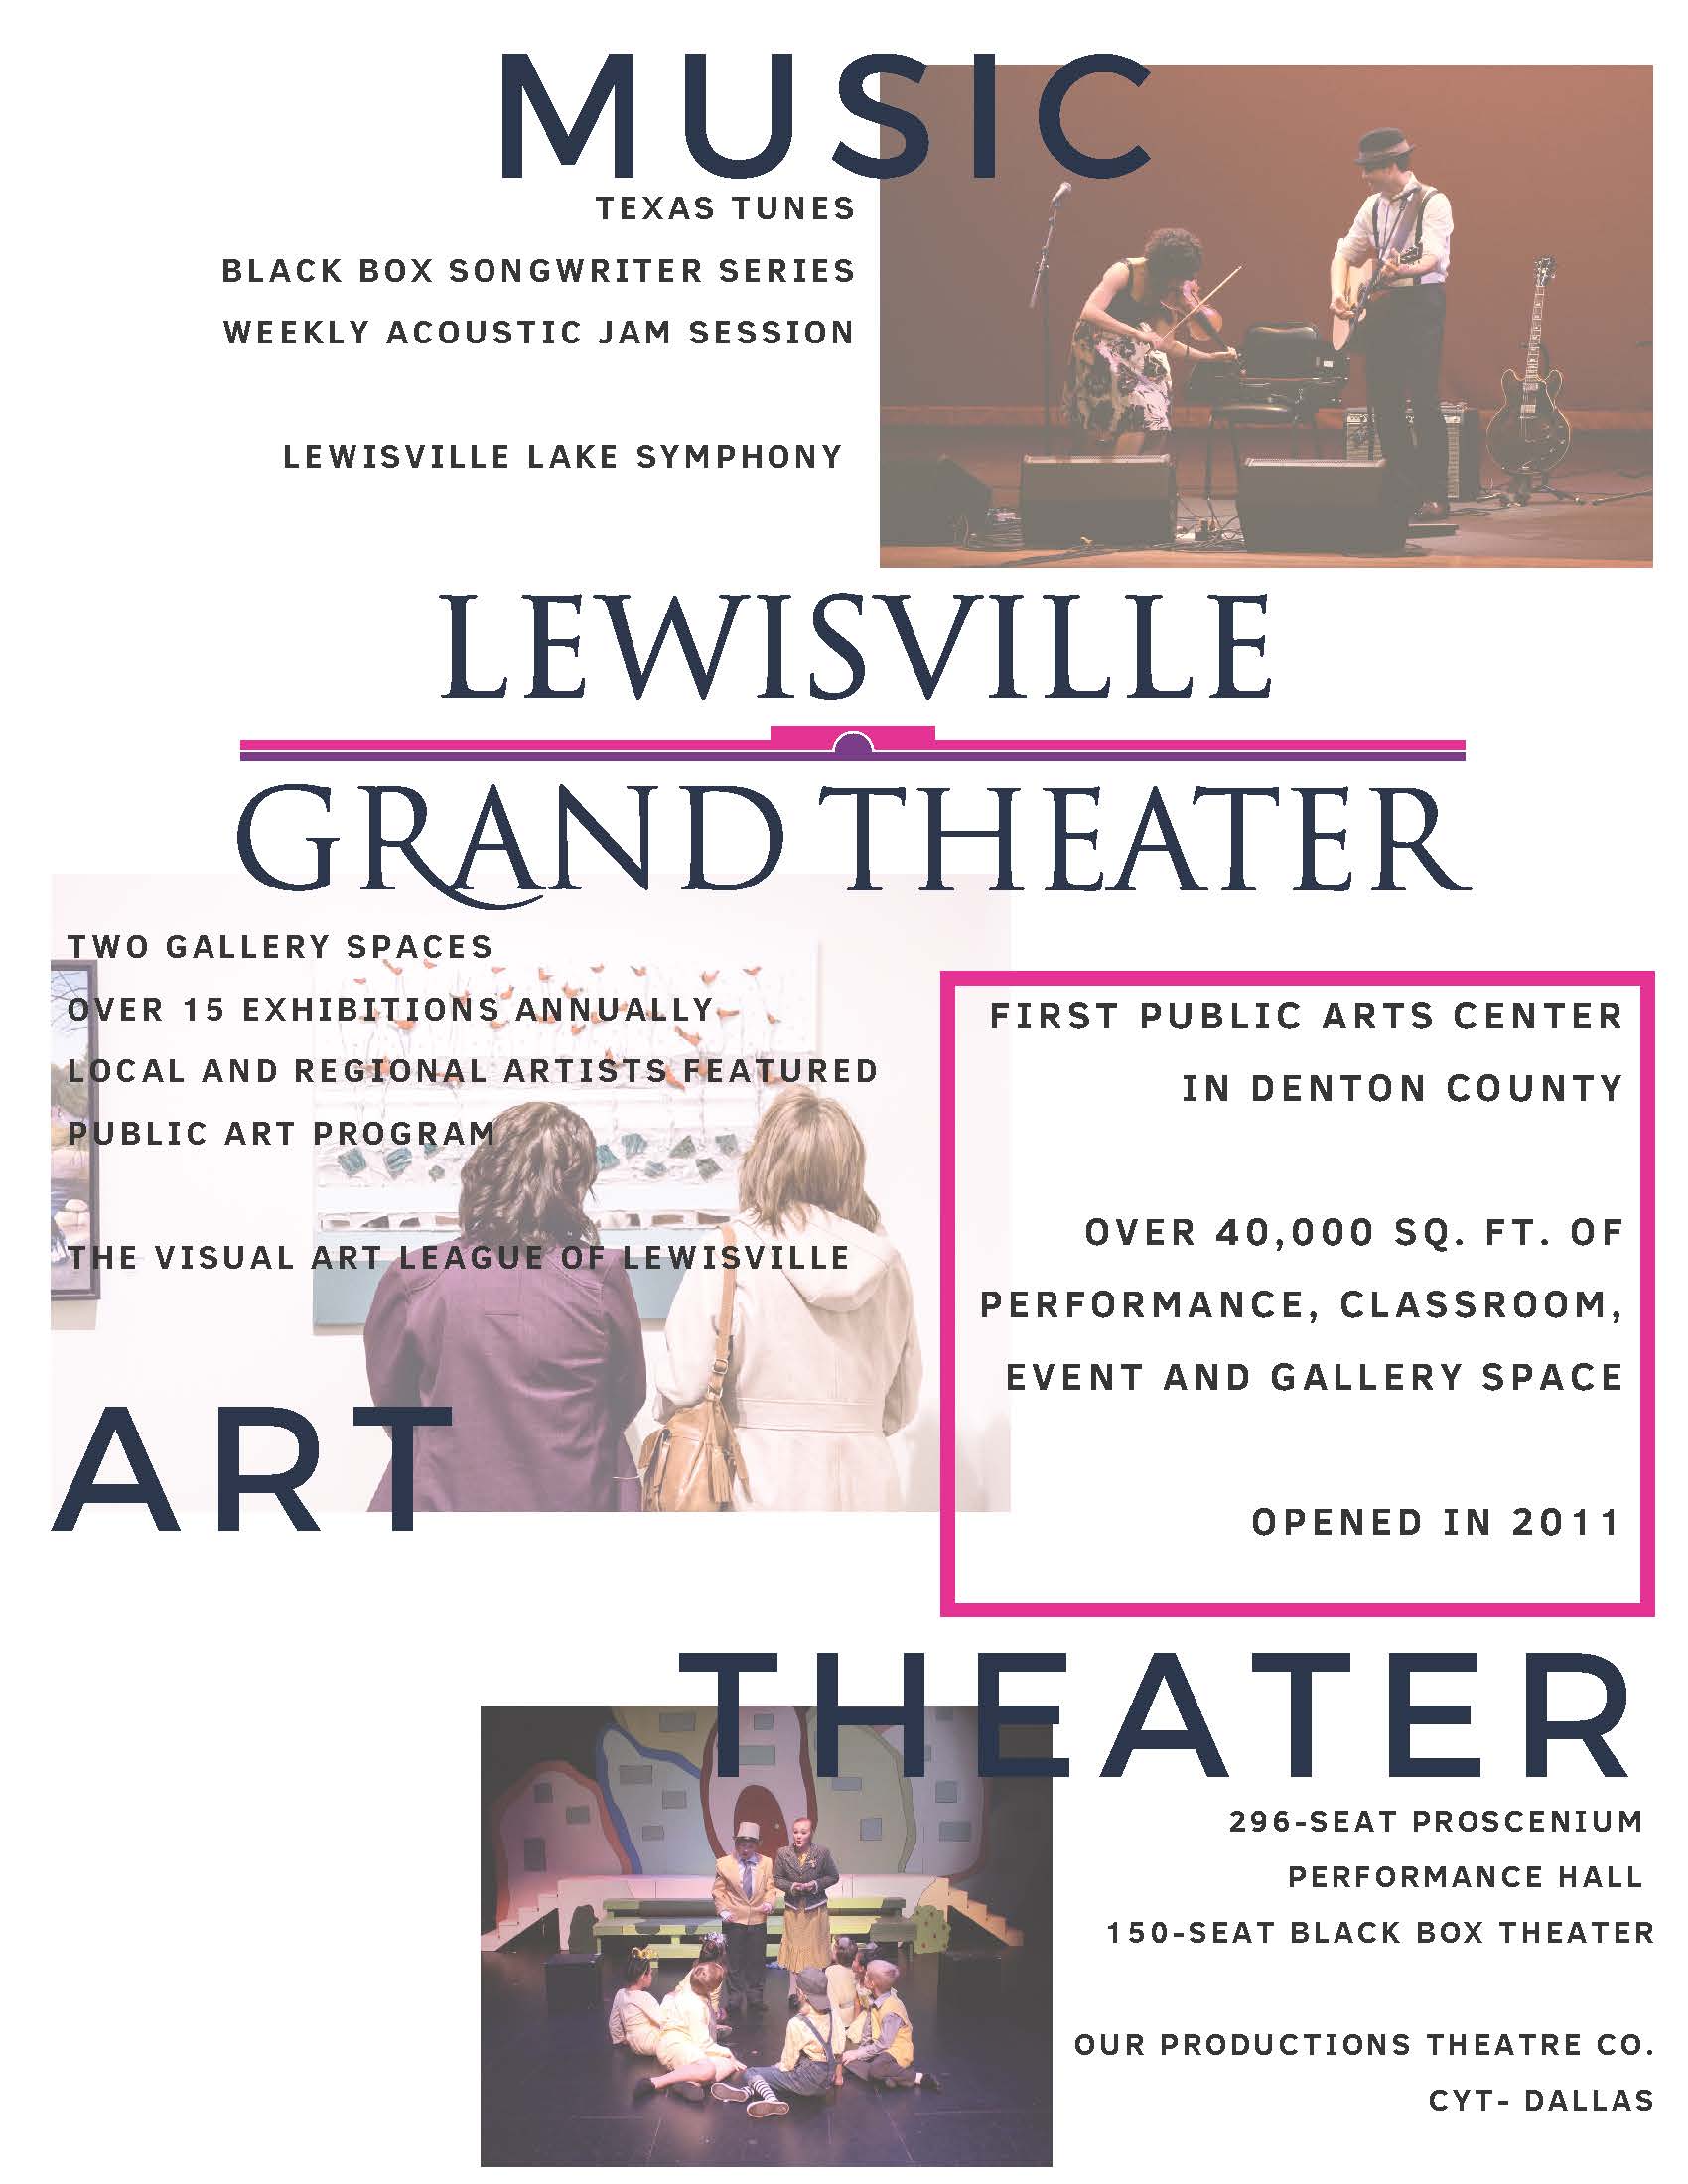 CH flyer 11 - Lewisville Grand Theater_Page_1